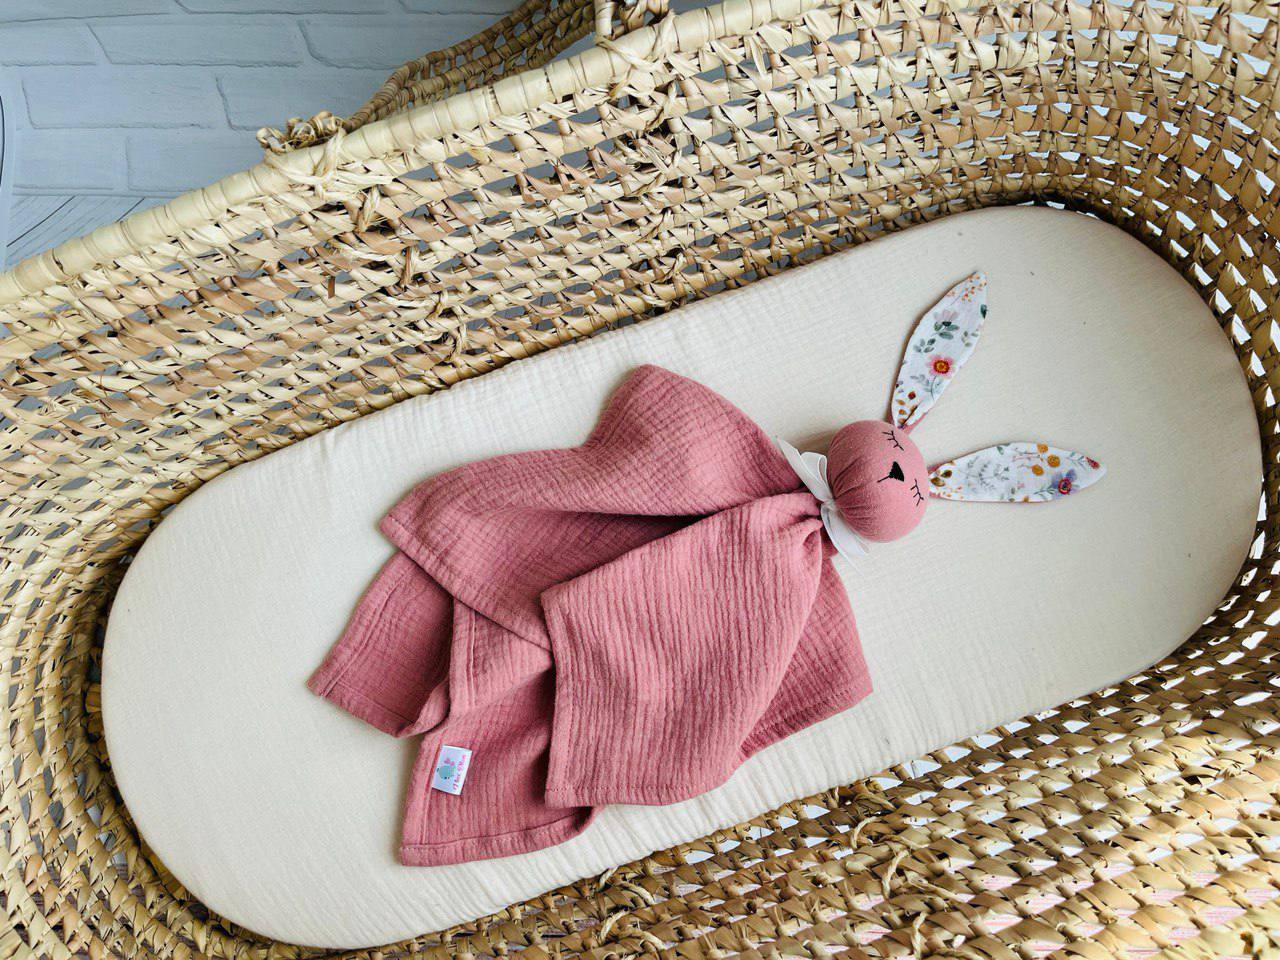 Double gauze Baby comforter Bunny in old pink color with floral ears